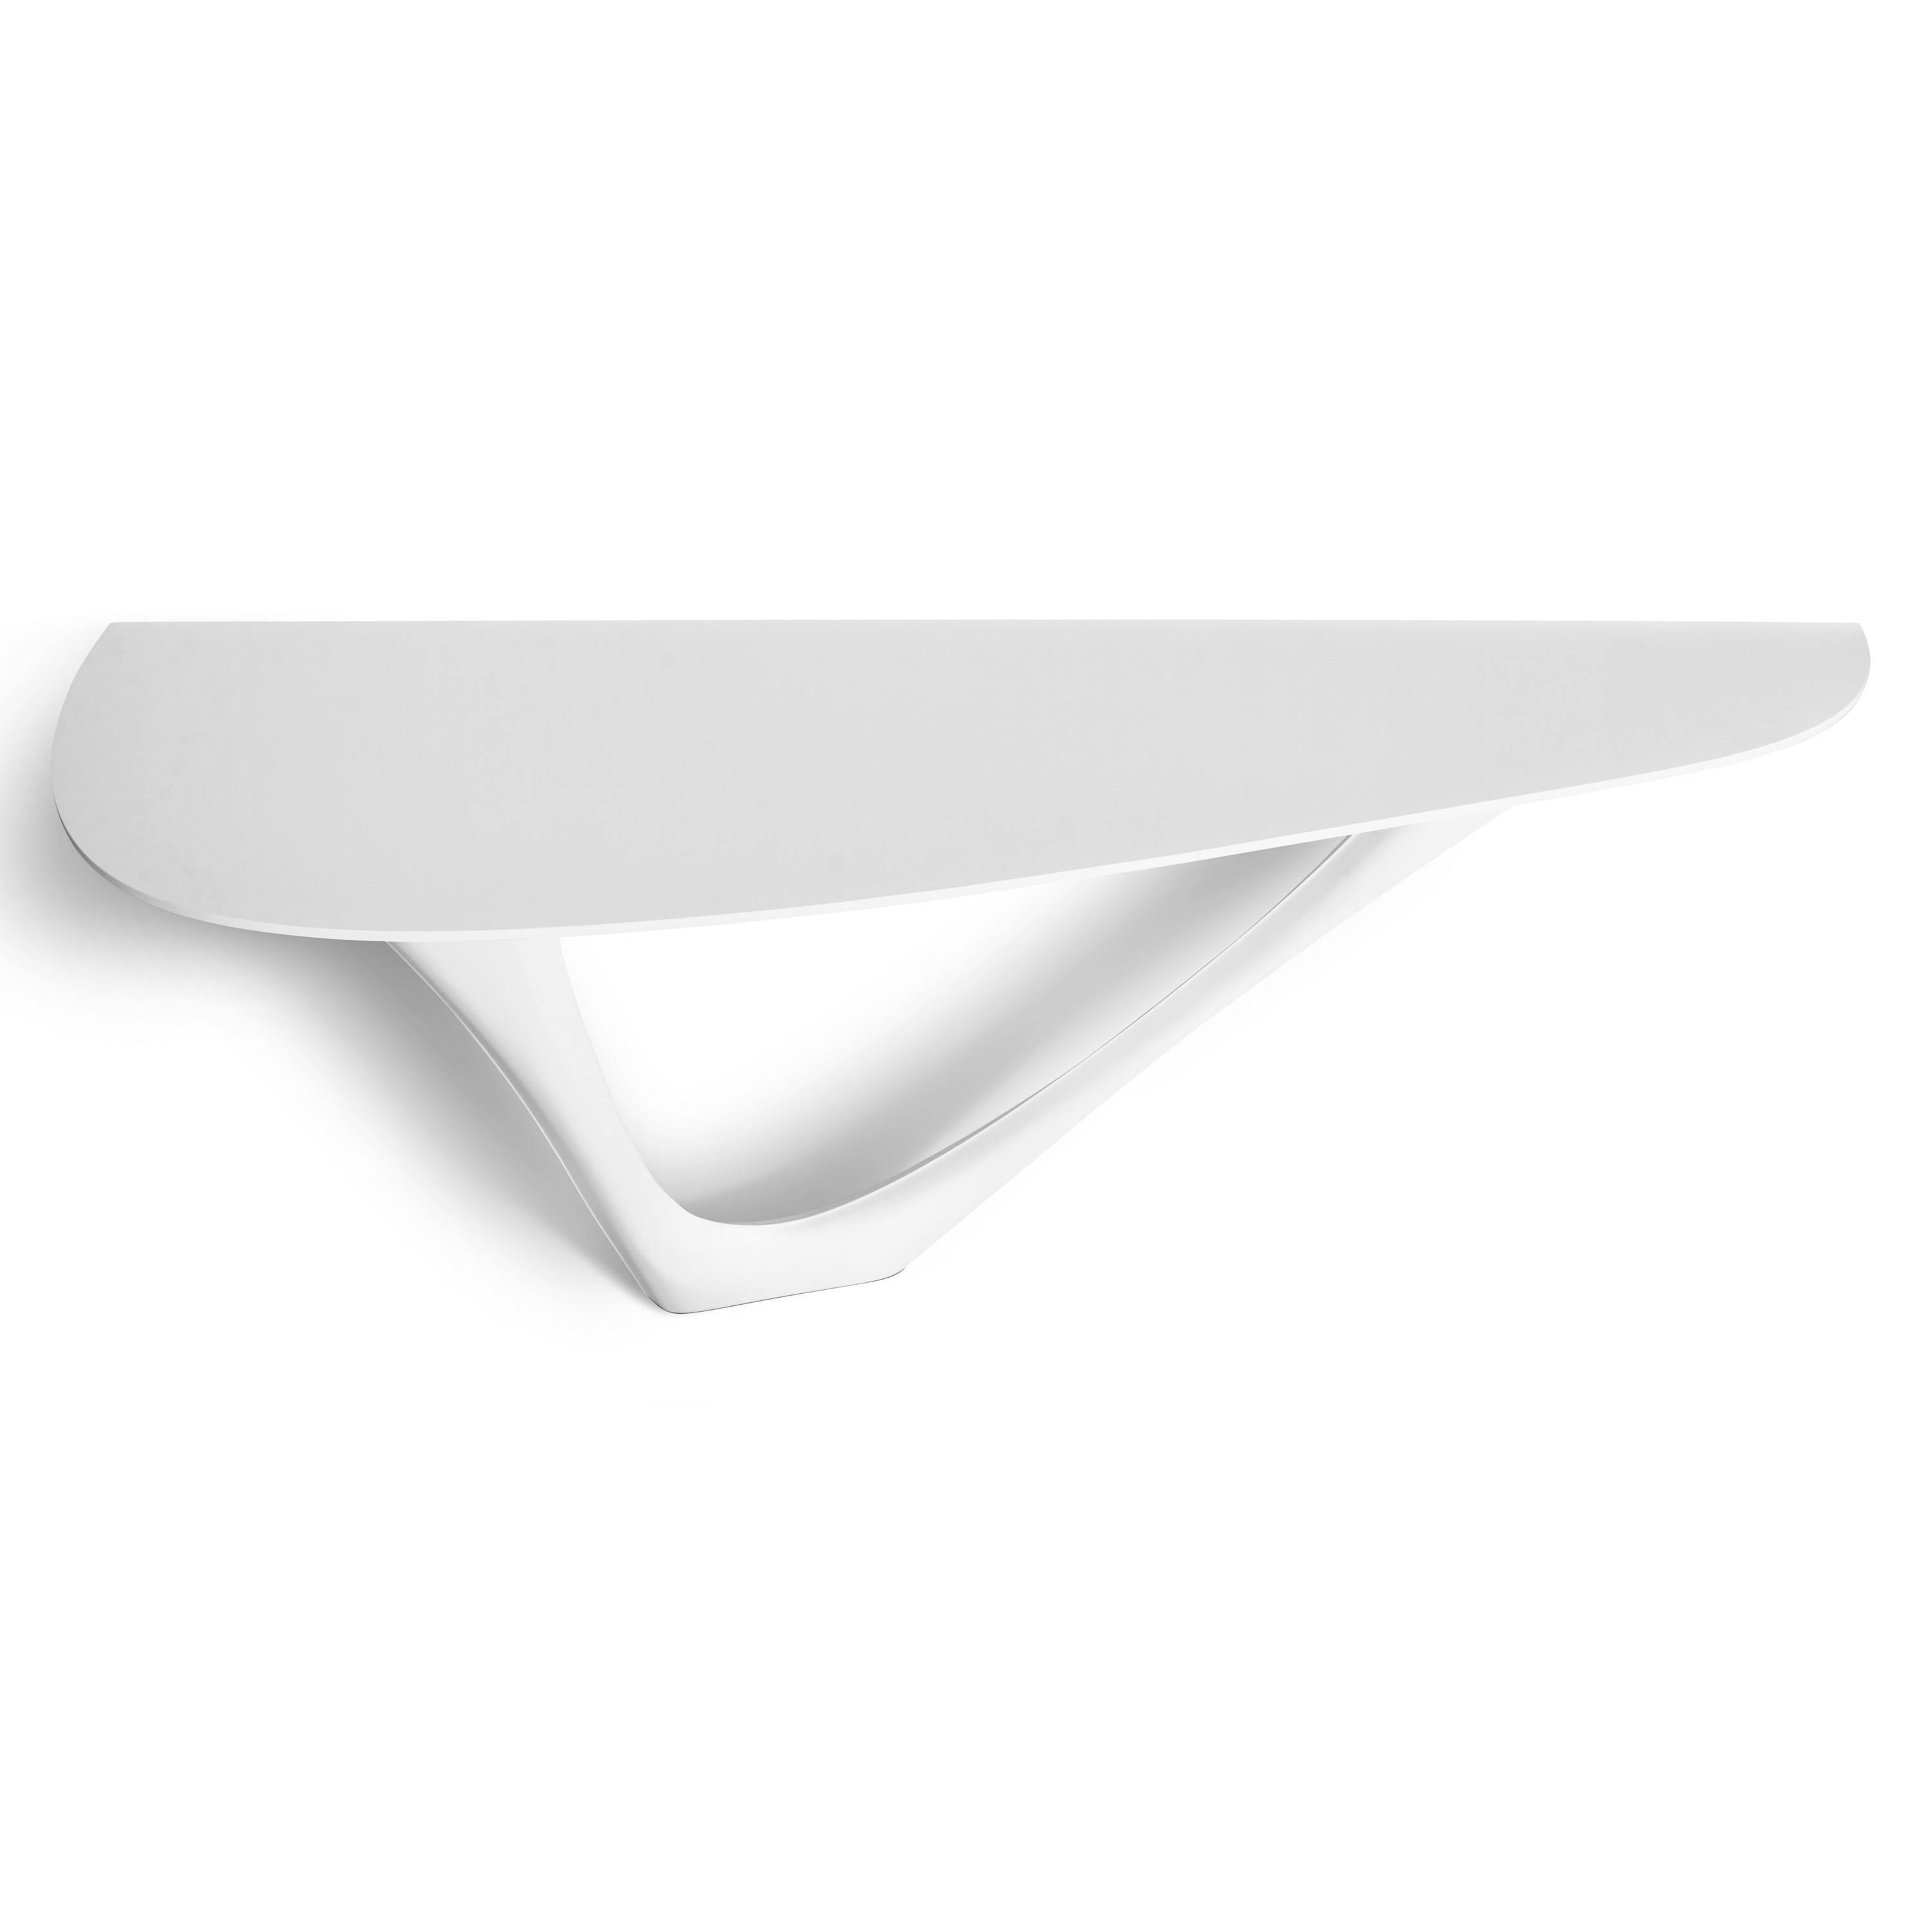 Powder-Coated White Matt G-Console Steel Base with Steel Top Mono by Zieta For Sale